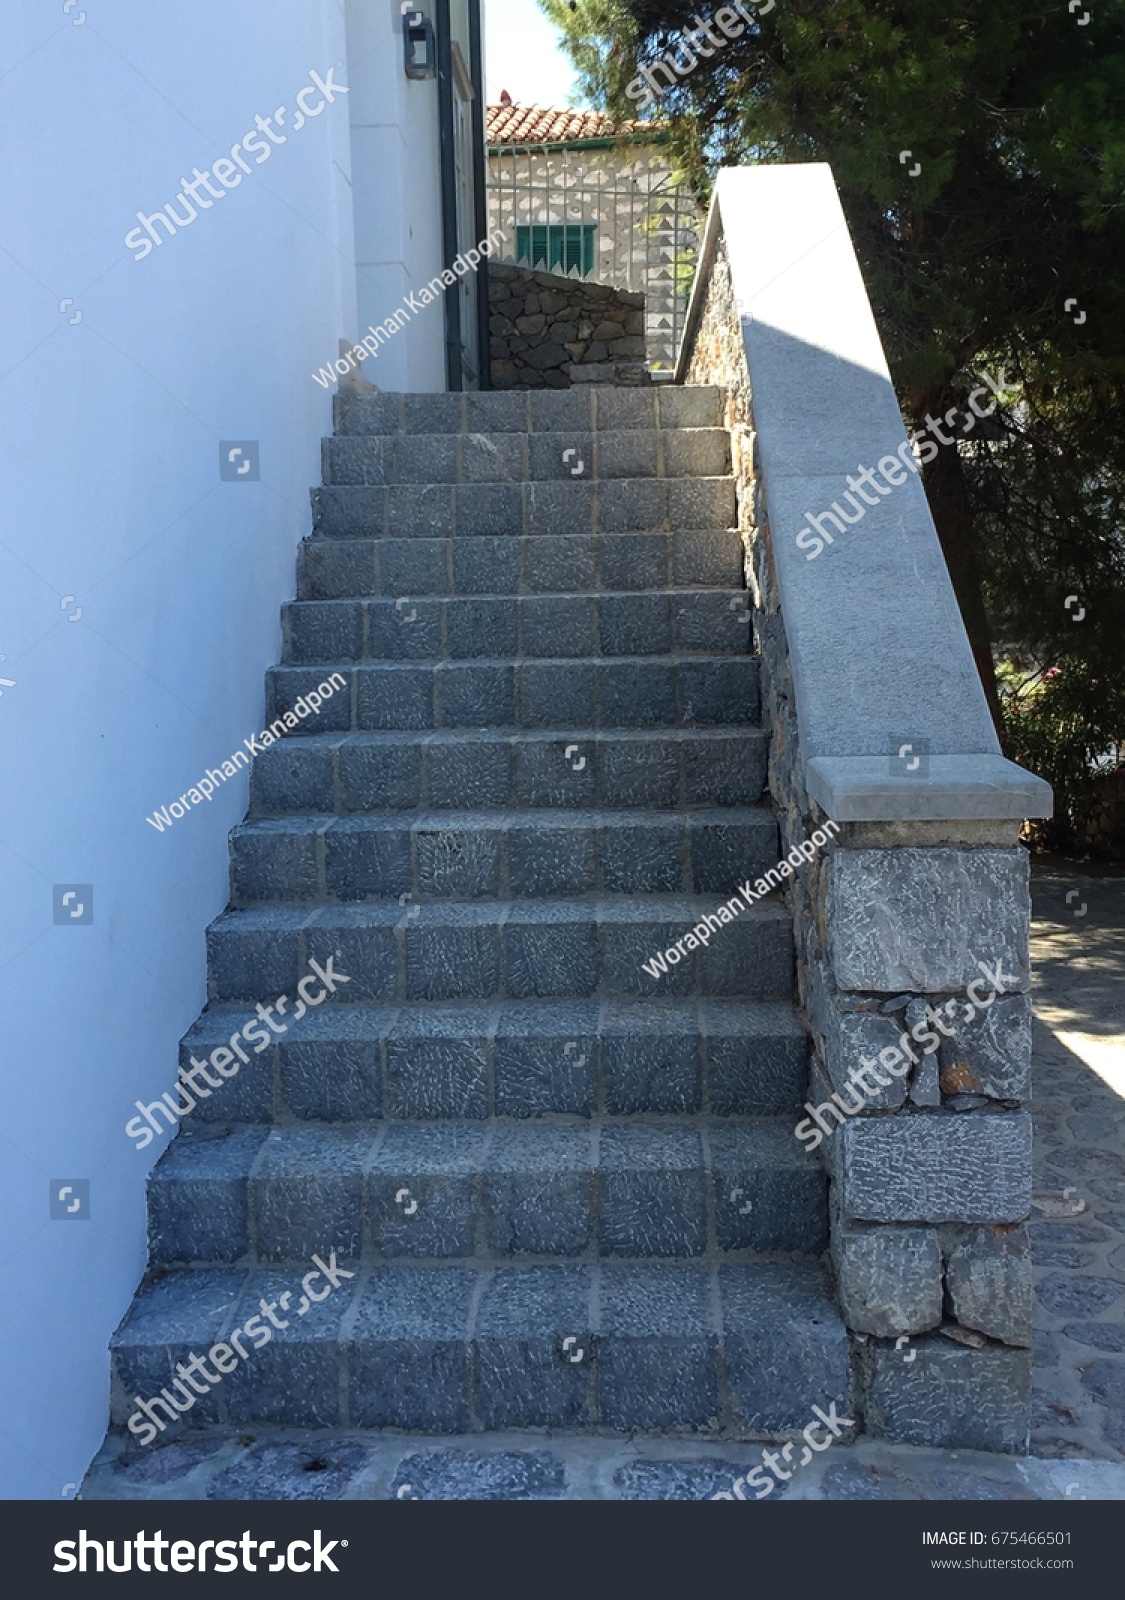 Vintage stone stair steps of a building #675466501